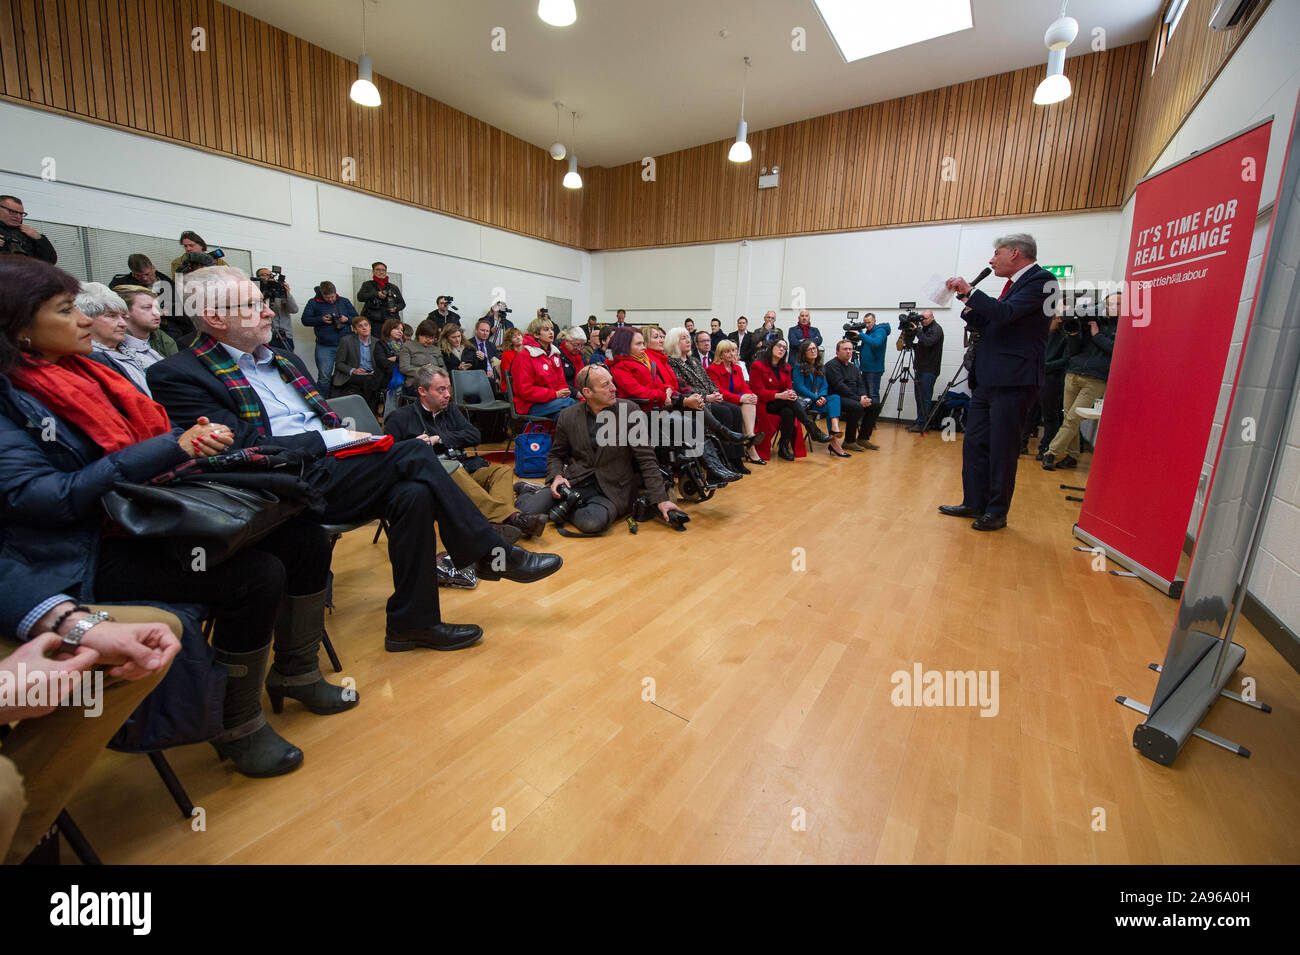 Glasgow, UK. 13th Nov, 2019. Pictured: (left) Jeremy Corbyn MP - Leader of the Labour Party, (right) Richard Leonard MSP - Leader of the Scottish Labour Party. Labour Leader Jeremy Corbyn tours key constituencies in Scotland as part of the biggest people-powered campaign in the history of our country. Jeremy Corbyn addresses Labour activists and campaign across key seats in Scotland alongside Scottish Labour candidates. Credit: Colin Fisher/Alamy Live News Stock Photo